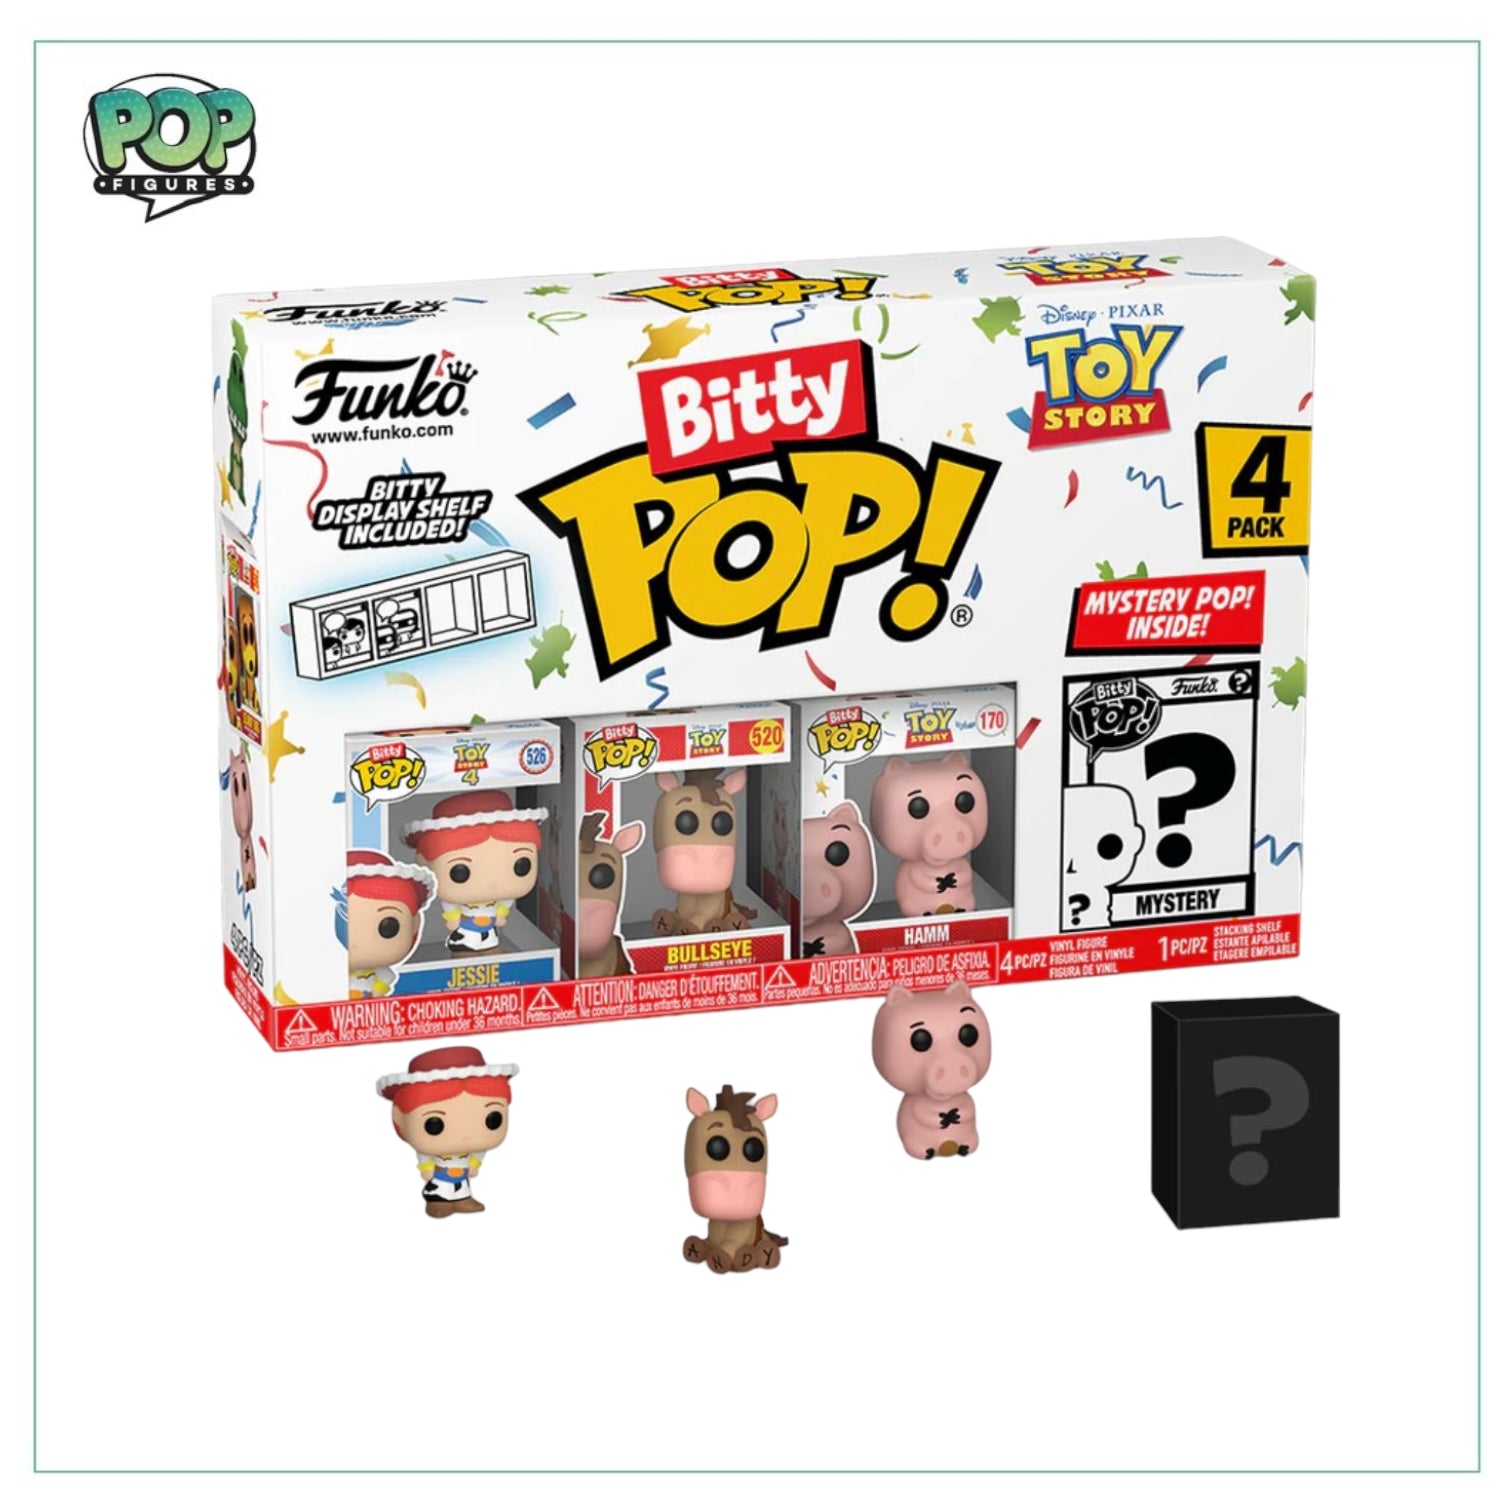 Jessie 4 pack Bitty POP! - Toy Story - Chance of Chase